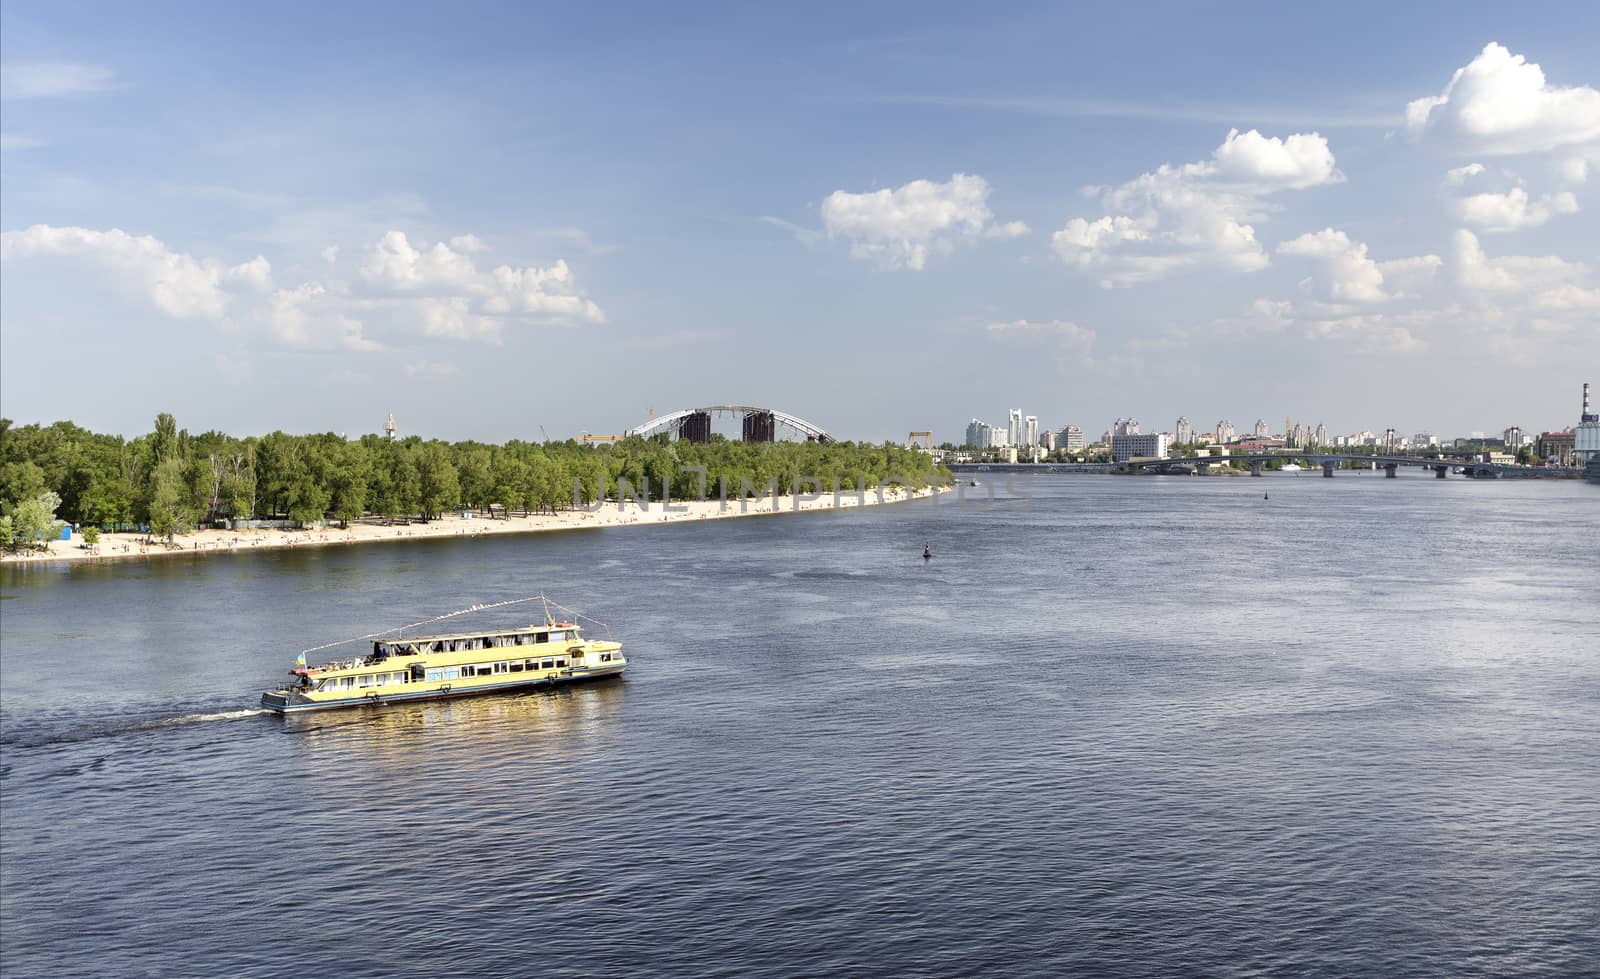 A pleasure boat walks along the Dnieper River on a bright summer day against the backdrop of the city beach, the blue sky and the city skyline of Kyiv